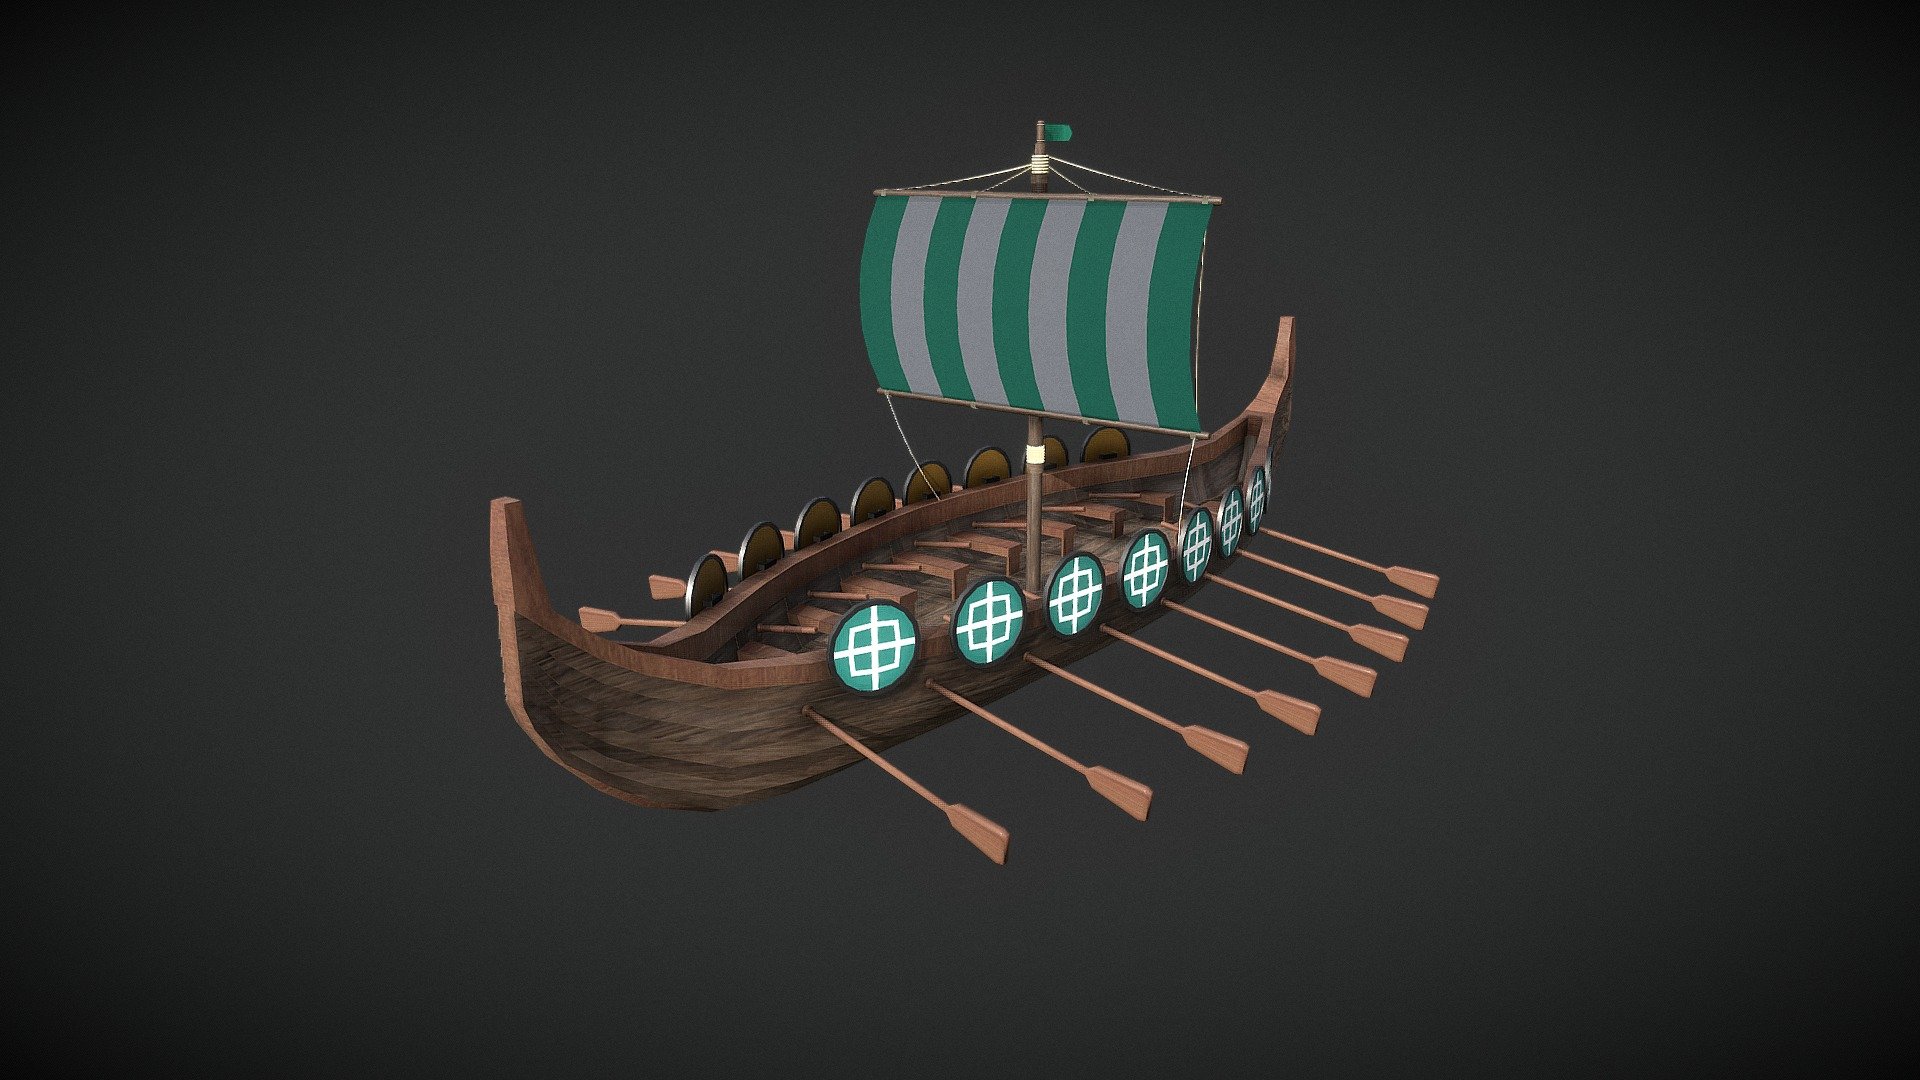 A wooden viking era longboat, made for sea and river travel. It is possible Ragnar once sailed this boat across the sea to Wessex, but no guarantees.

It was a tough and busy week, but I still wanted to challenge myself with this weeks prompt. Getting the planks on the side right was tricky, but was a fun puzzle to figure out.

Made for week 23 of the #SketchfabweeklyChallenge - Viking Longboat - Download Free 3D model by Rosbergen Designs (@RosbergenDesigns) 3d model